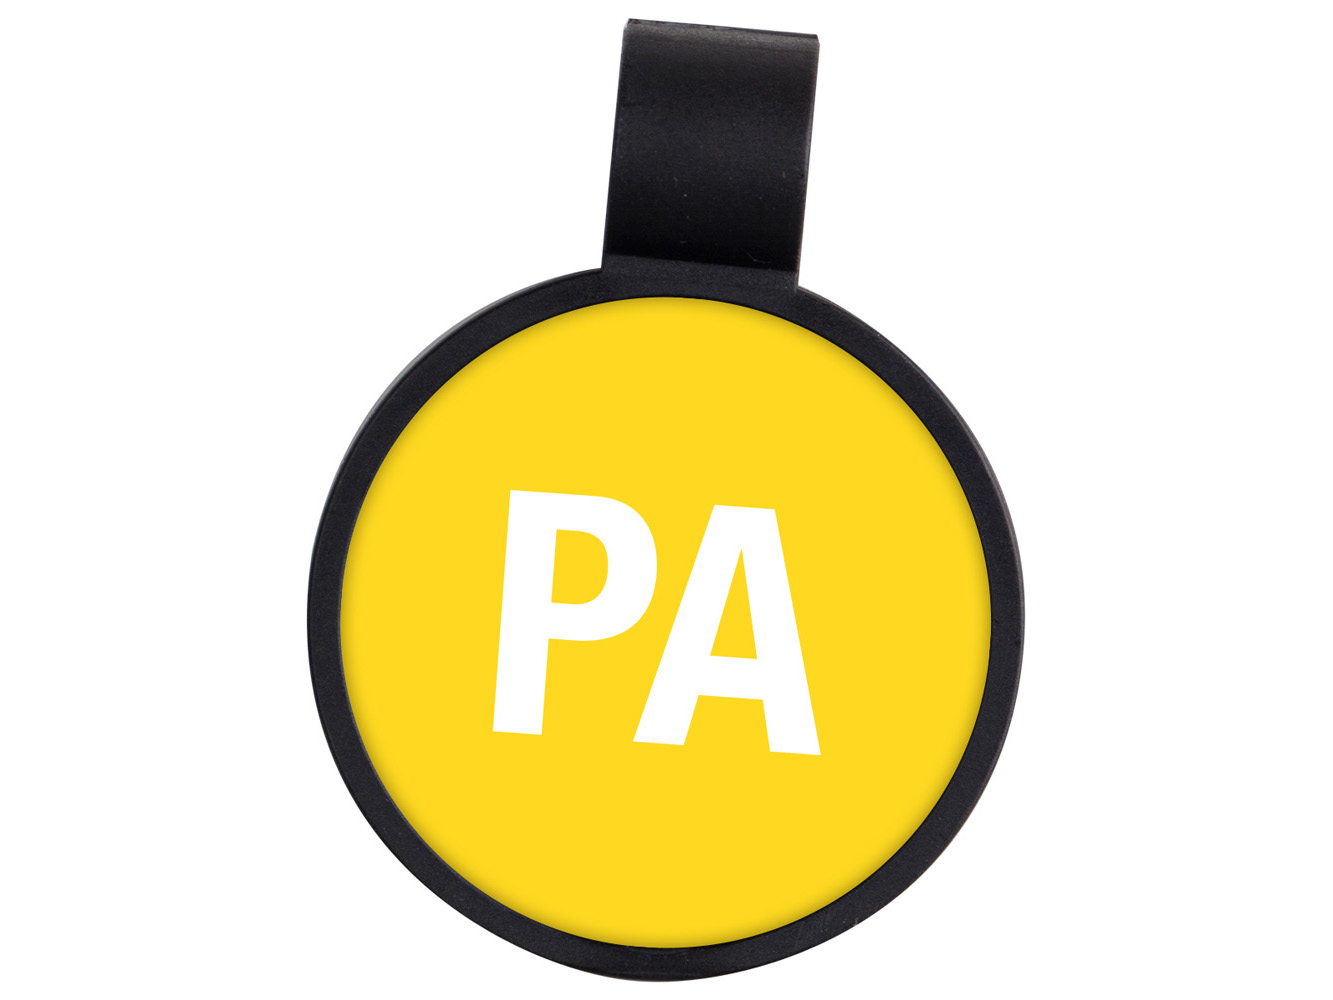 STP22: PA – Physician Assistant (Yellow 115C) Anti-Microbial Stethoscope ID Tag